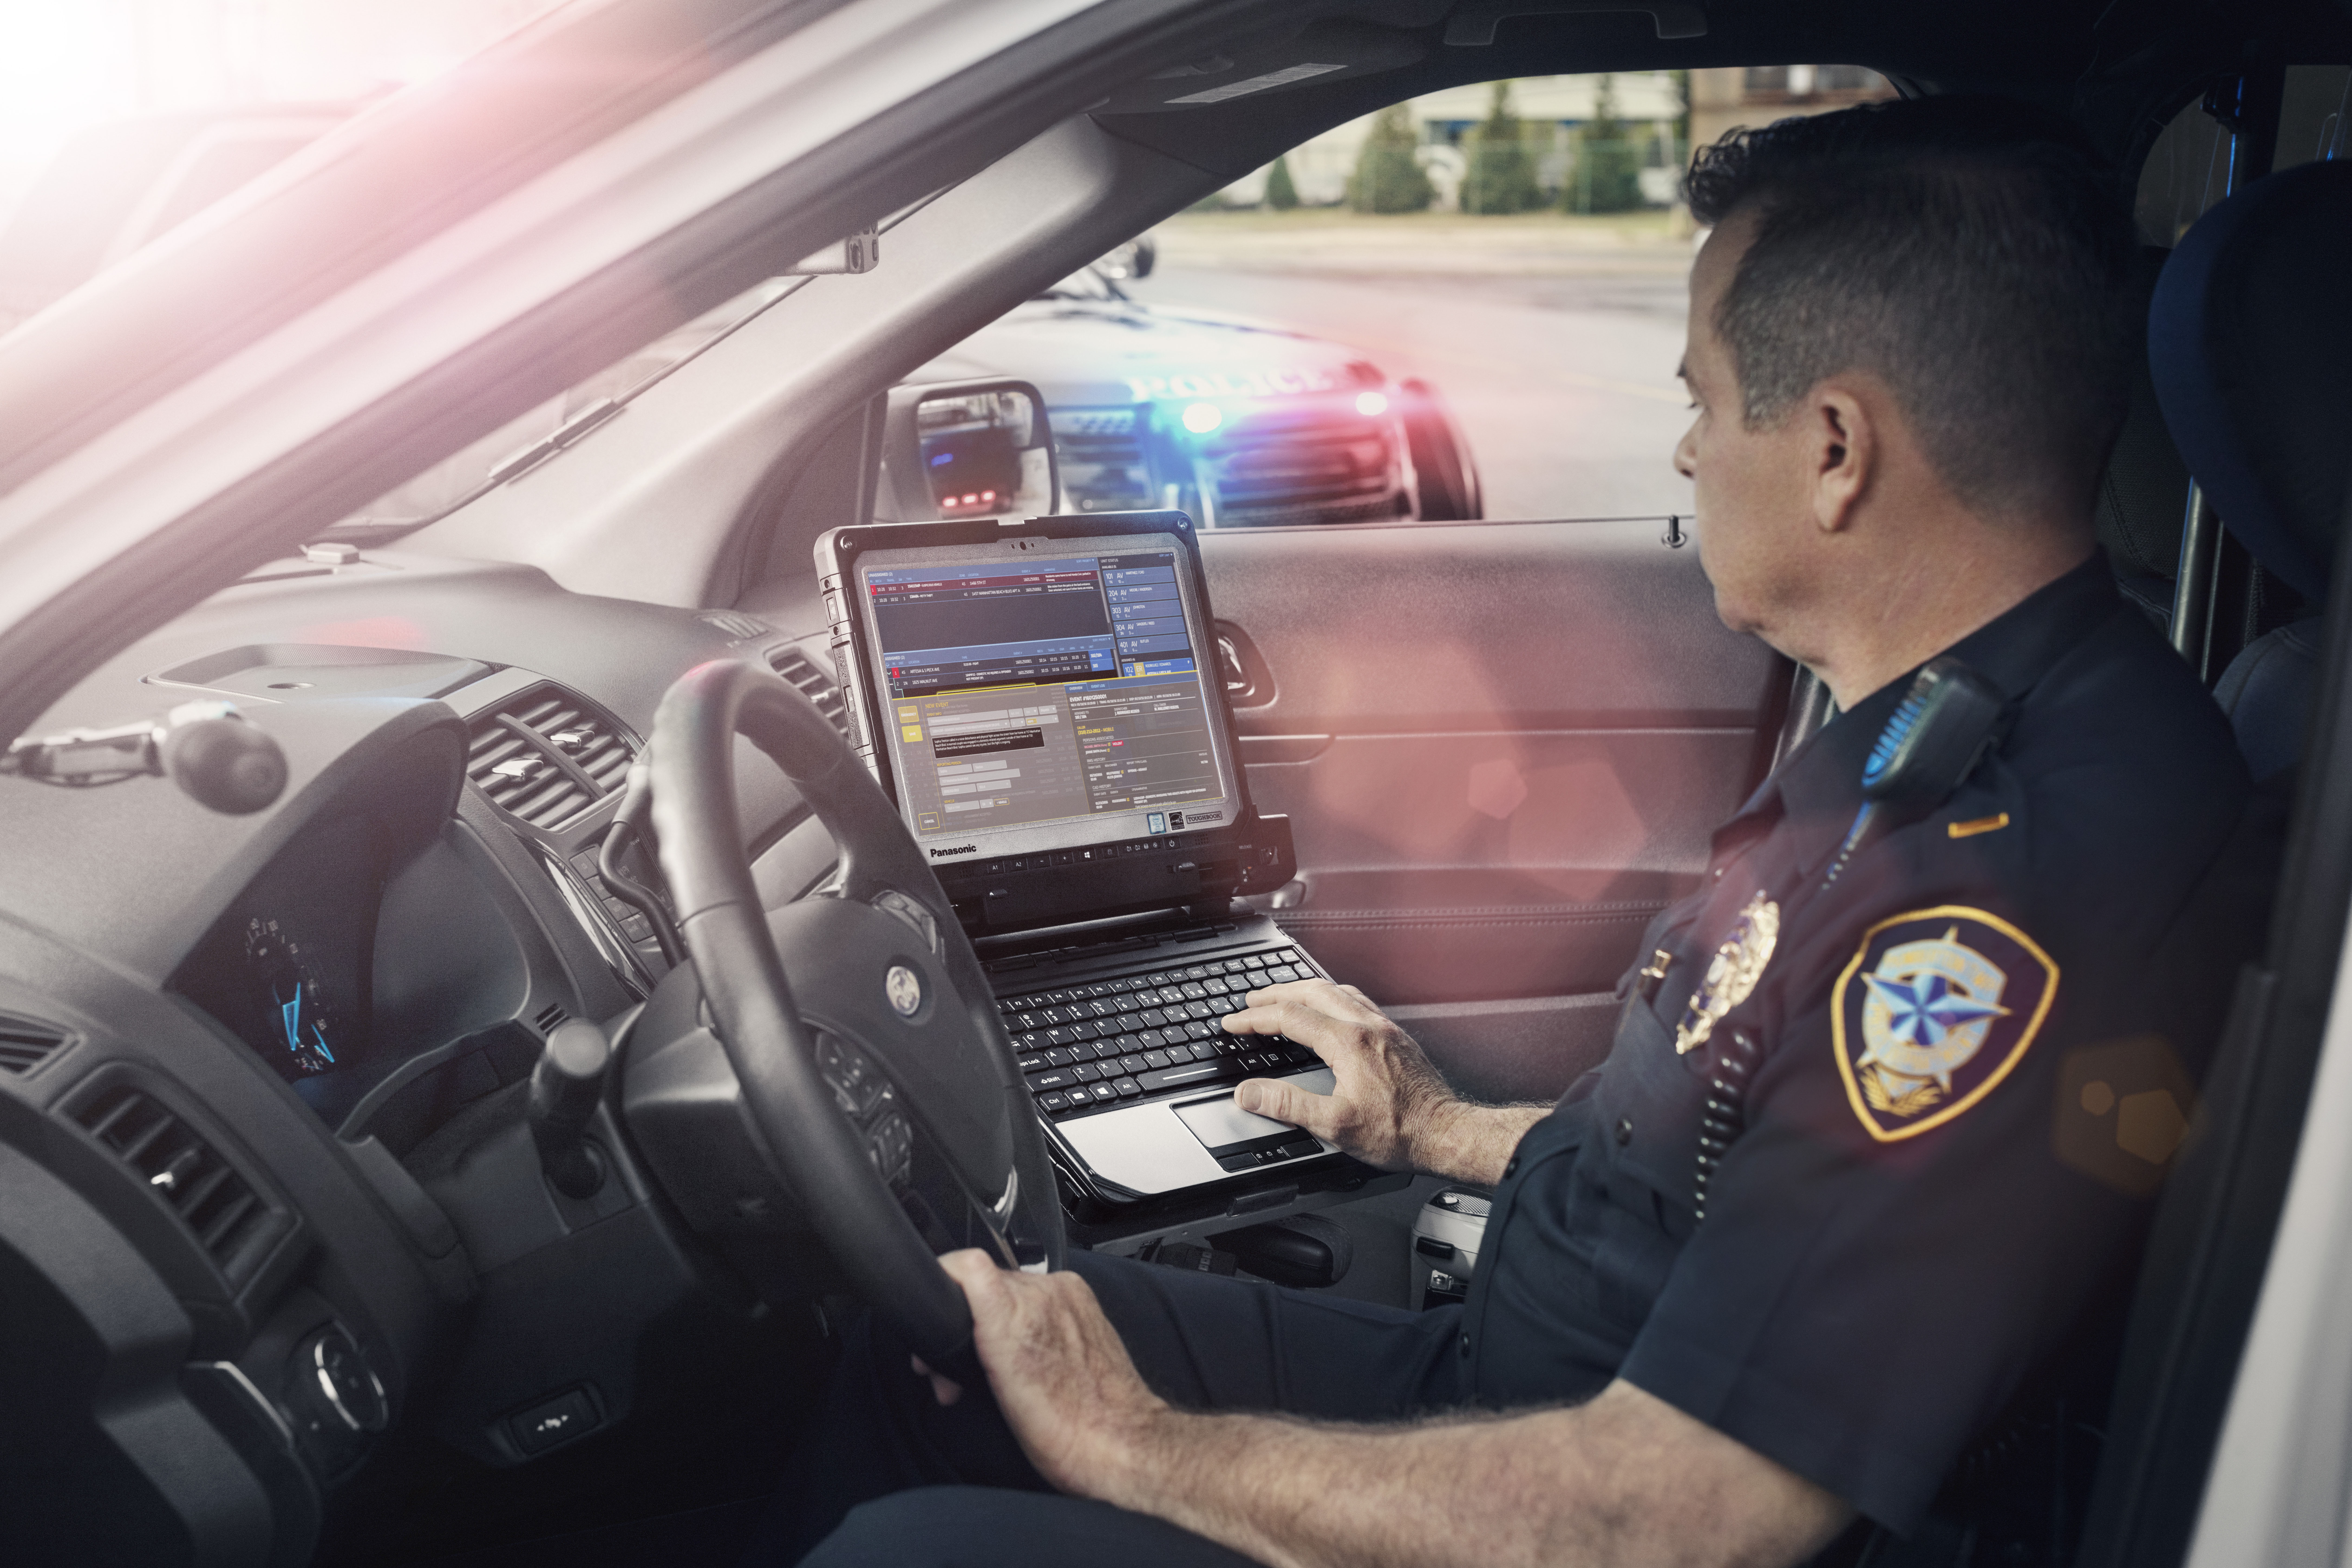 A law enforcement officer uses police technology in a cruiser on the job.